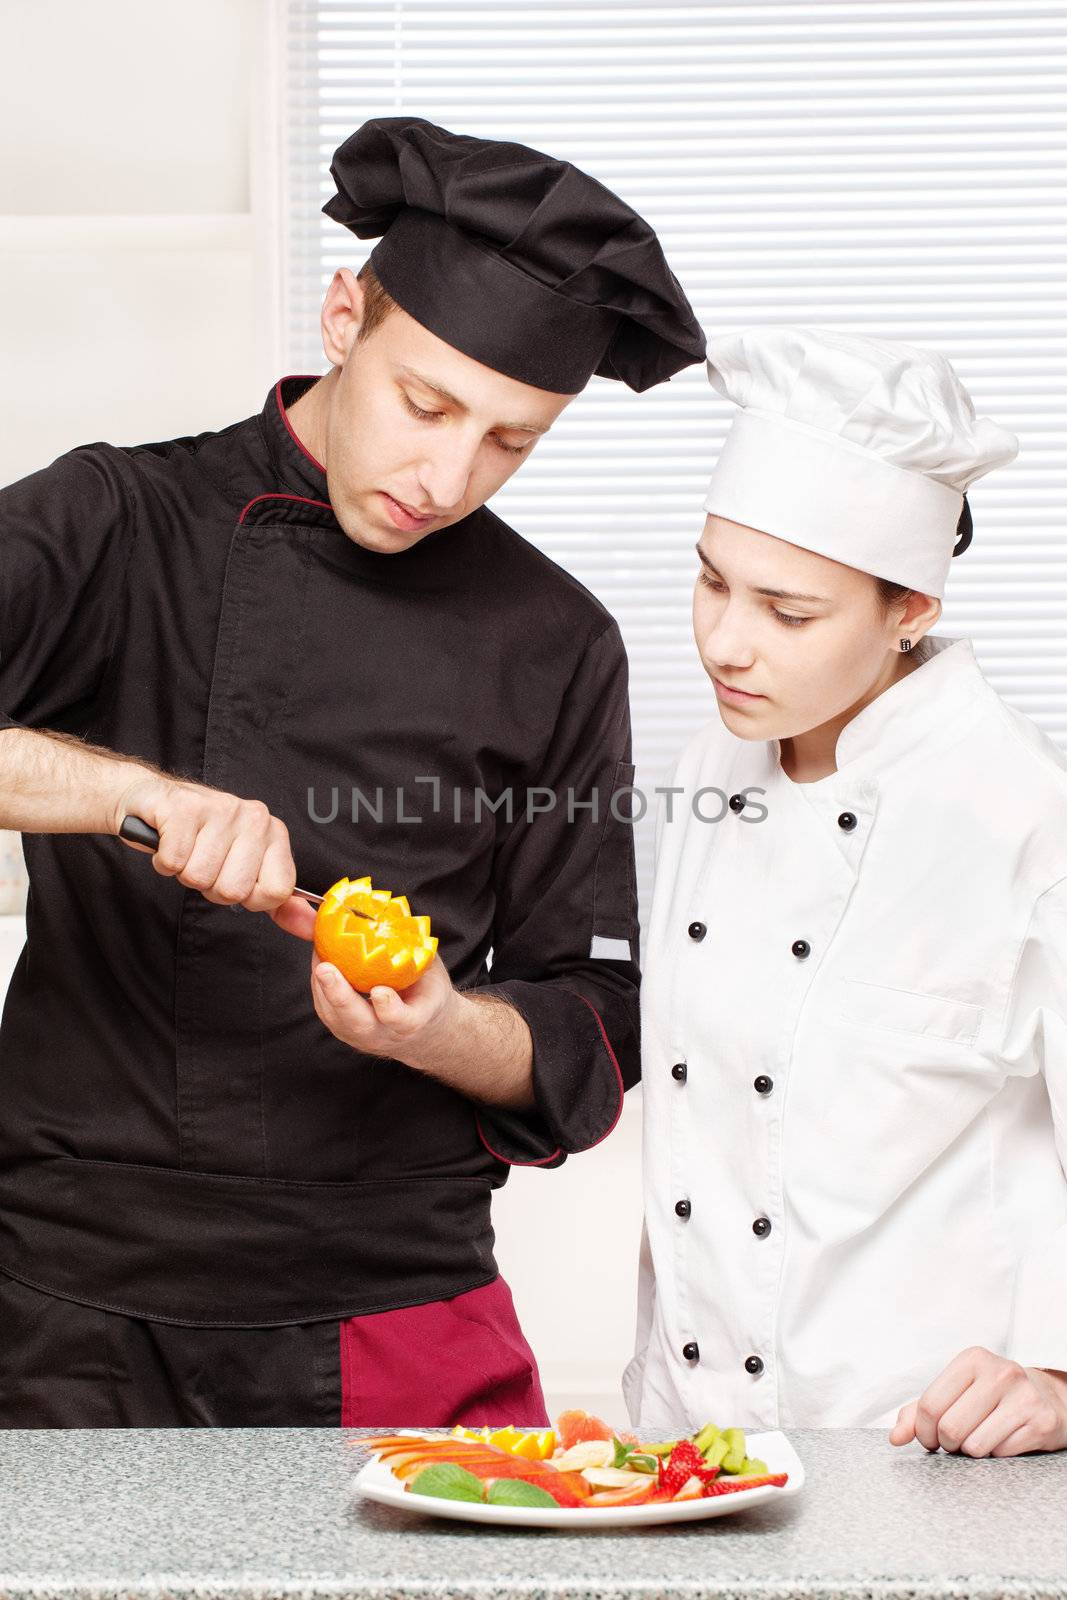 Senior chef teaches young chef to decorate fruit by imarin